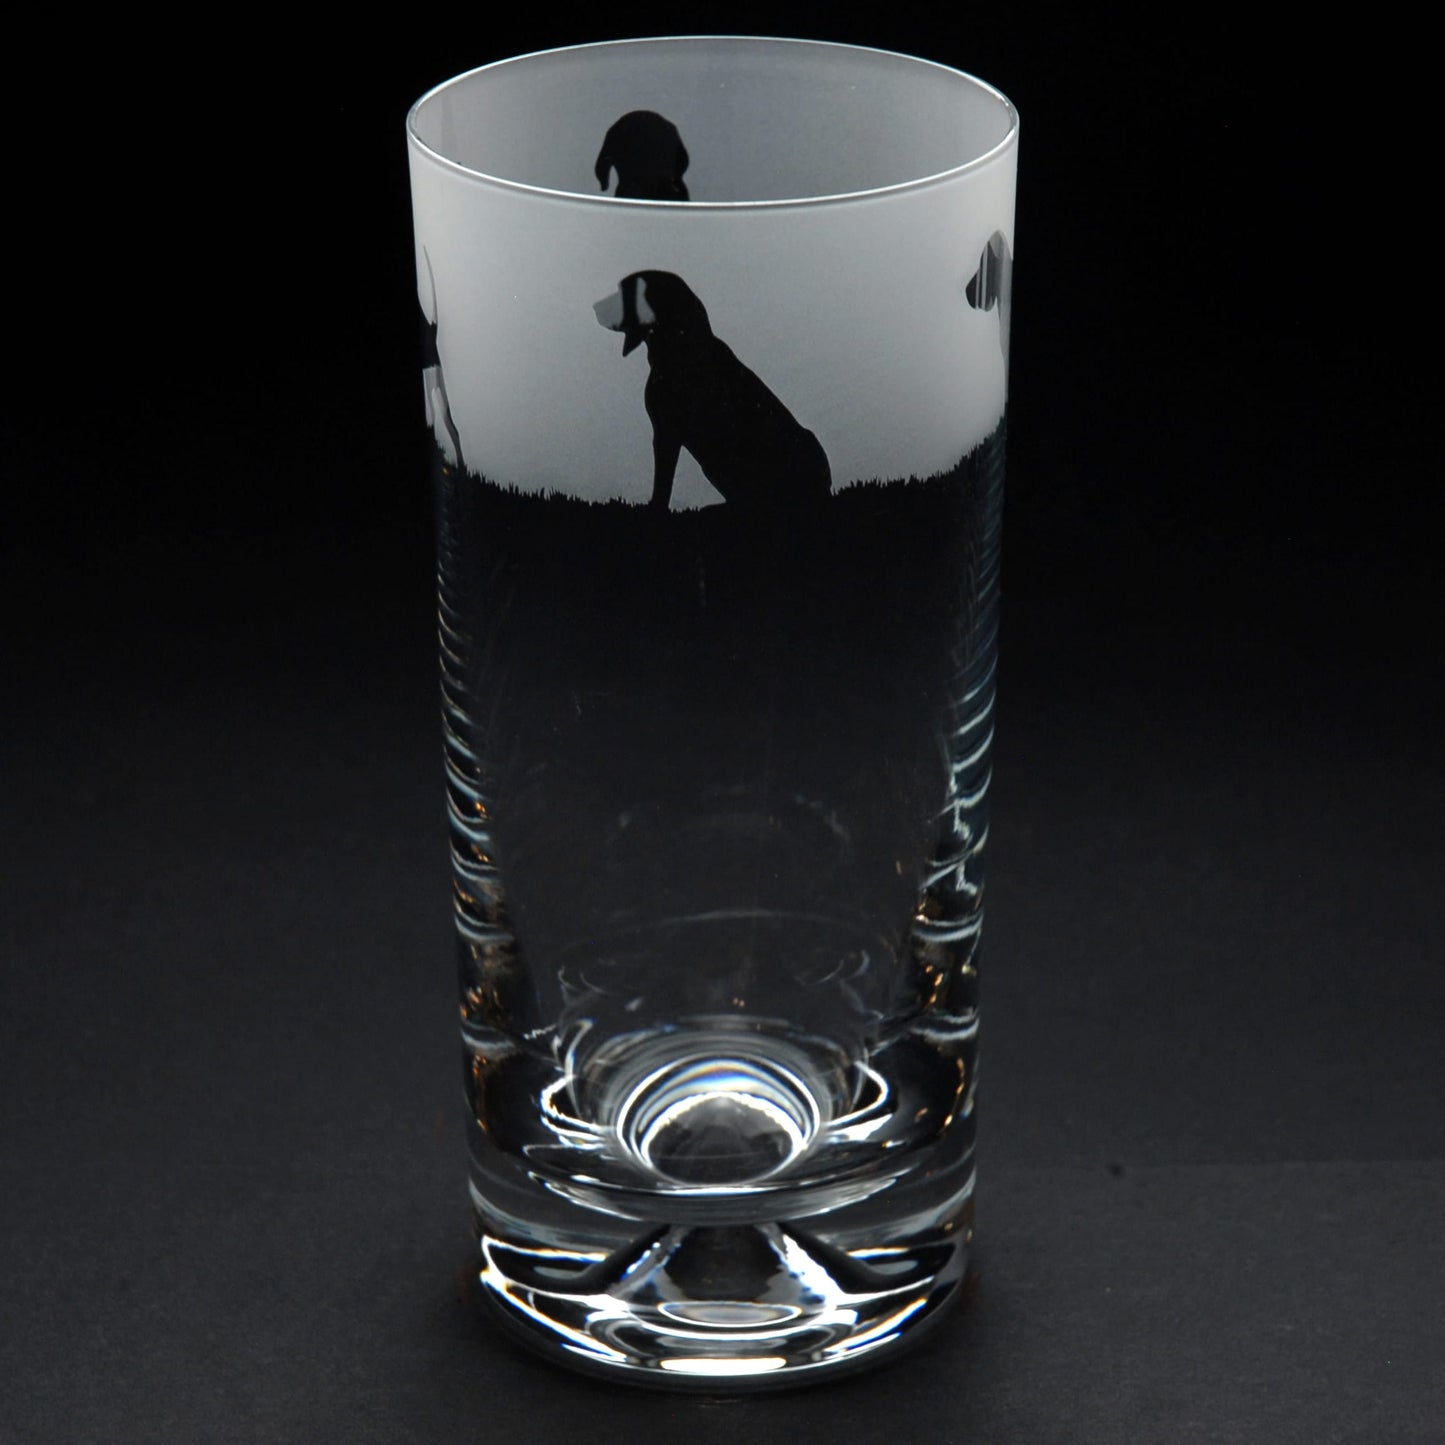 Beagle Dog Highball Glass - Hand Etched/Engraved Gift